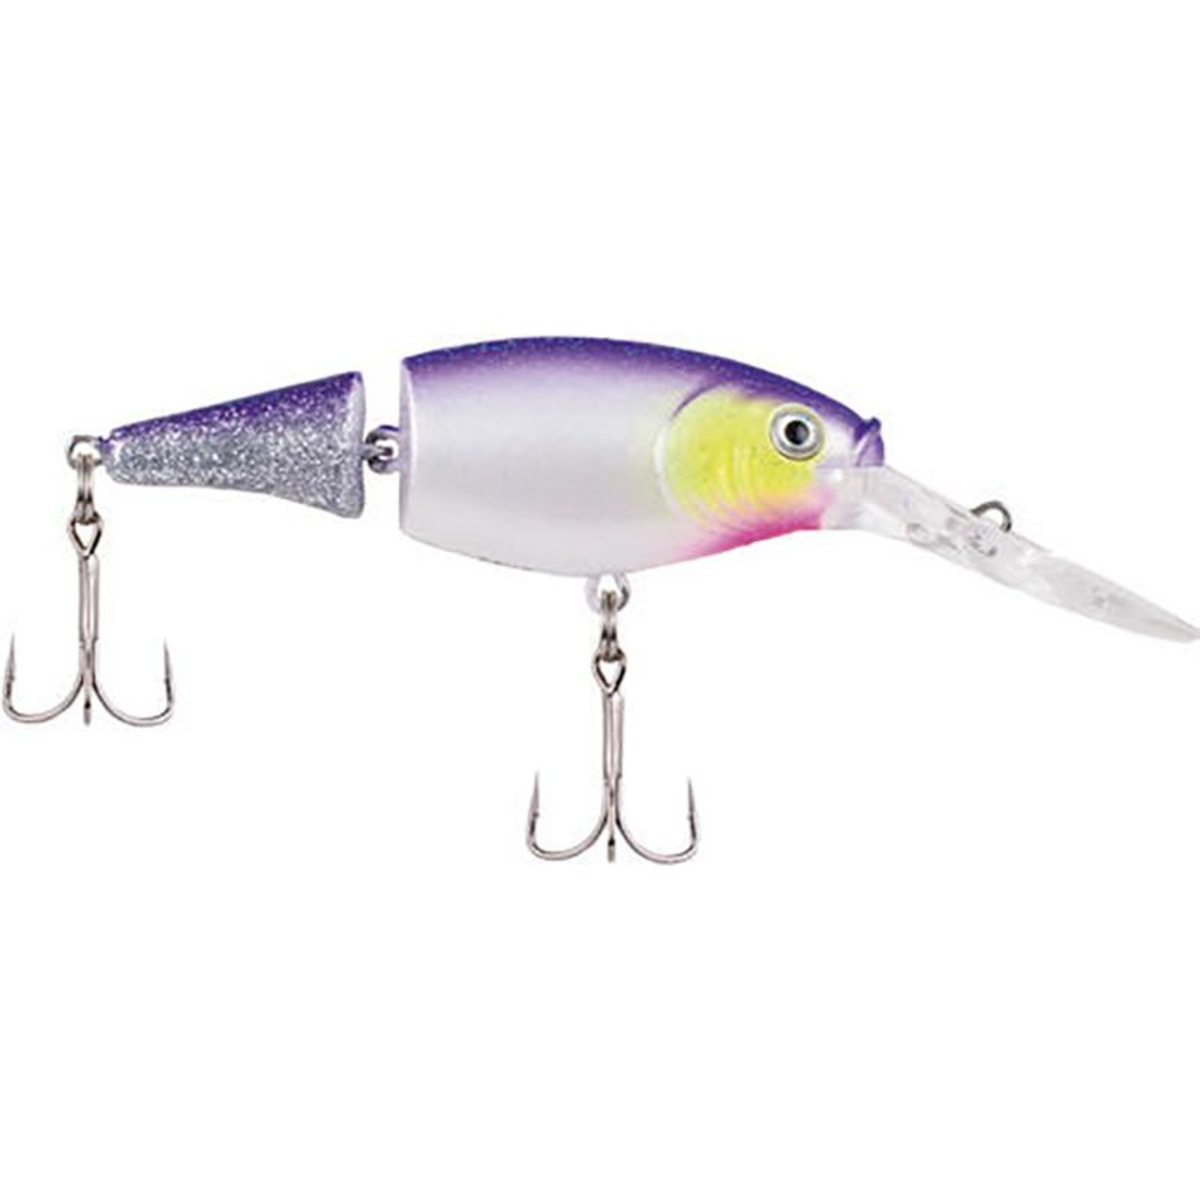 Berkley Flicker Shad Jointed Fire Tail - 5 cm - 6 g - Rico Suave